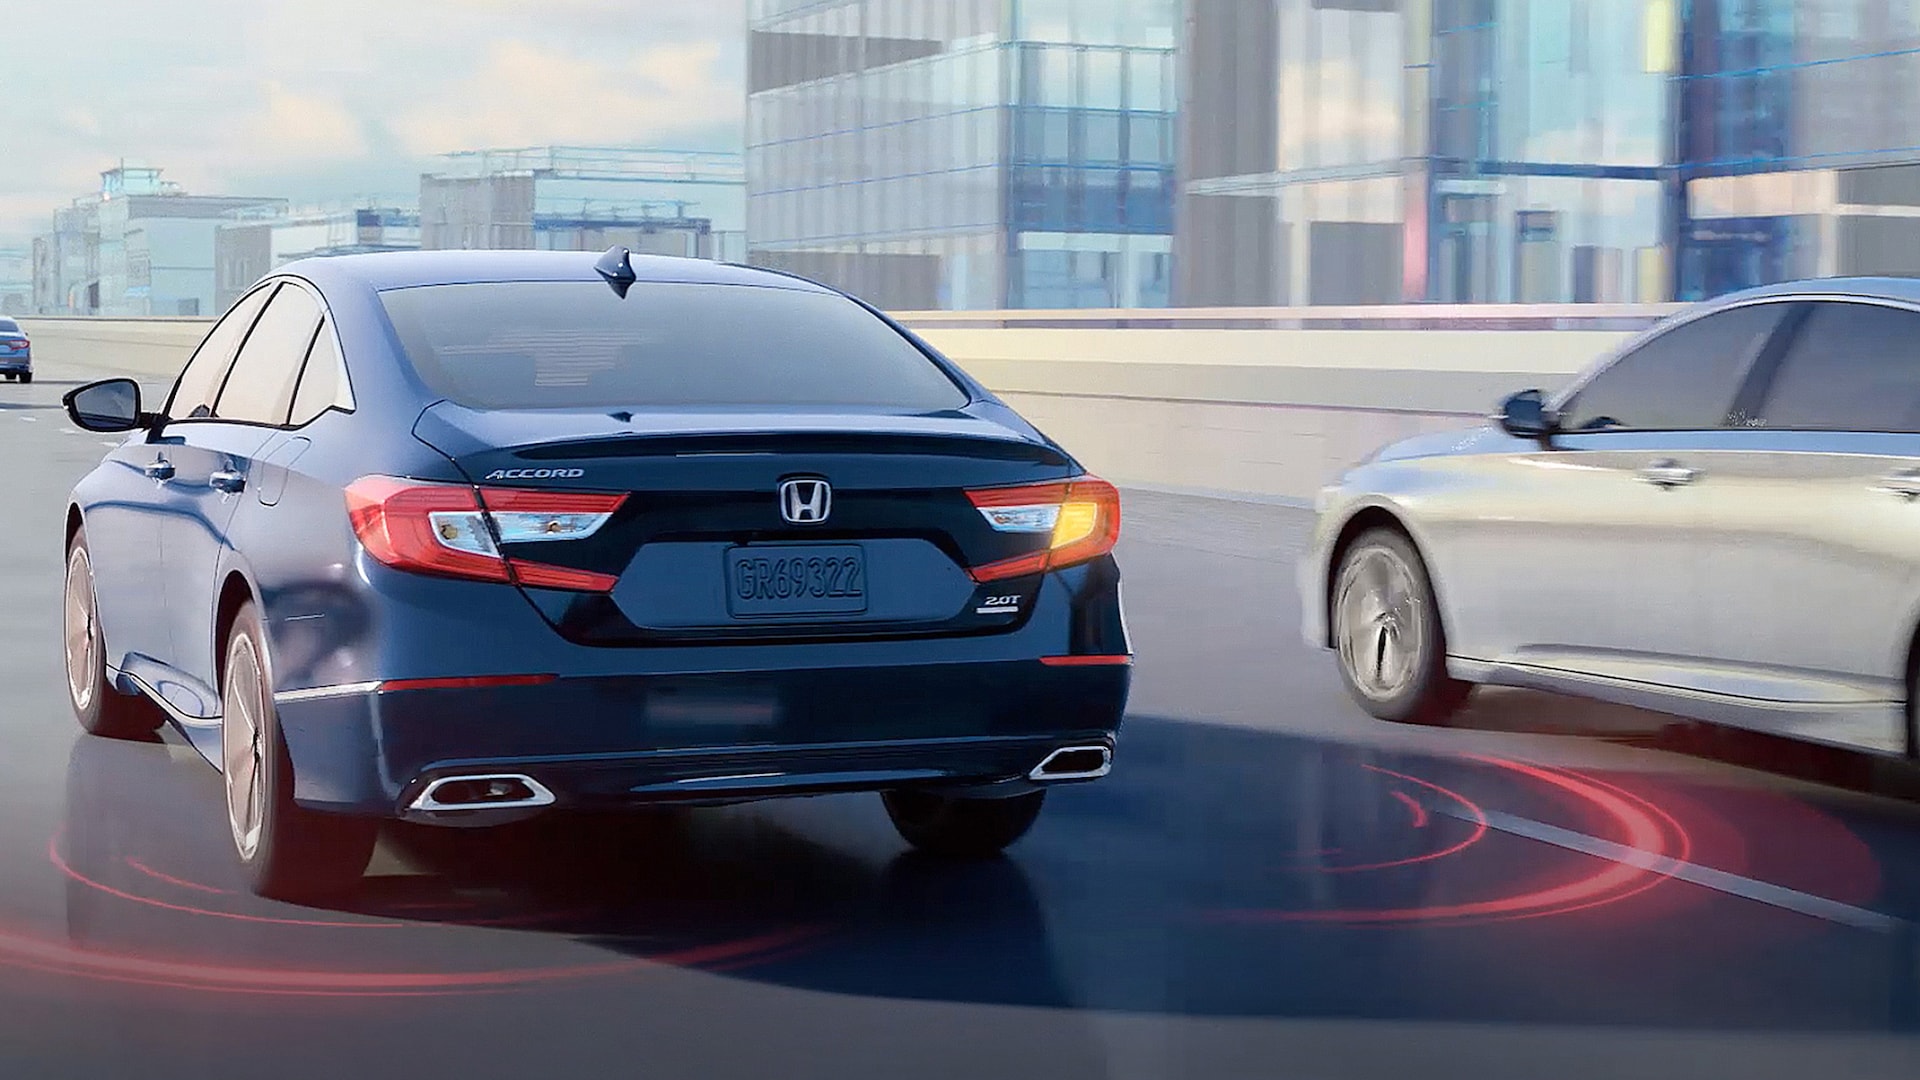 Are you looking for a 2021 Honda Accord or a 2021 Honda Accord? There is no need to look further than Louisville Honda World in Louisville, Kentucky.